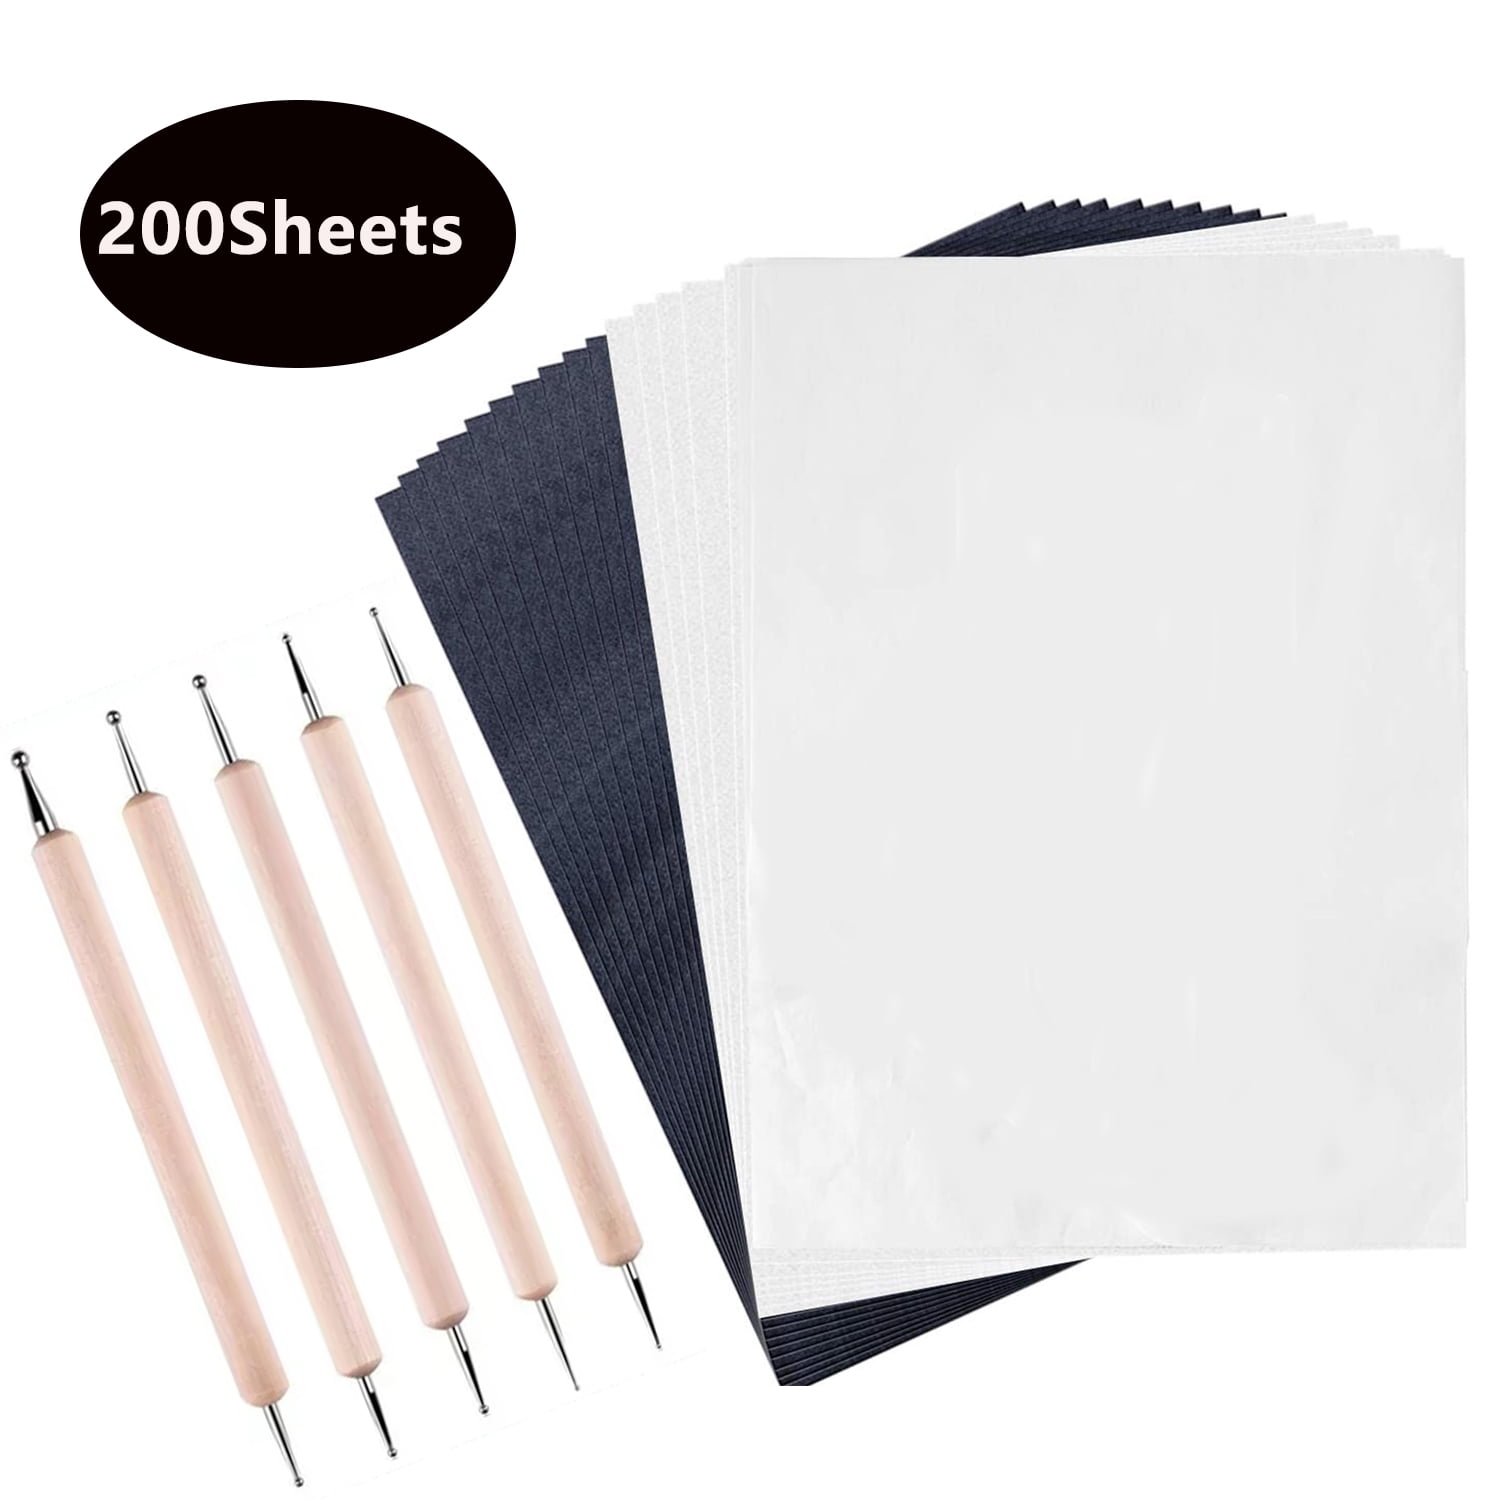 100 Sheets Tracing Paper,Carbon Graphite Transfer Paper with 5 Pieces Embossing Styluses Stylus Dotting Tools for Wood,Paper,Canvas and Other Art